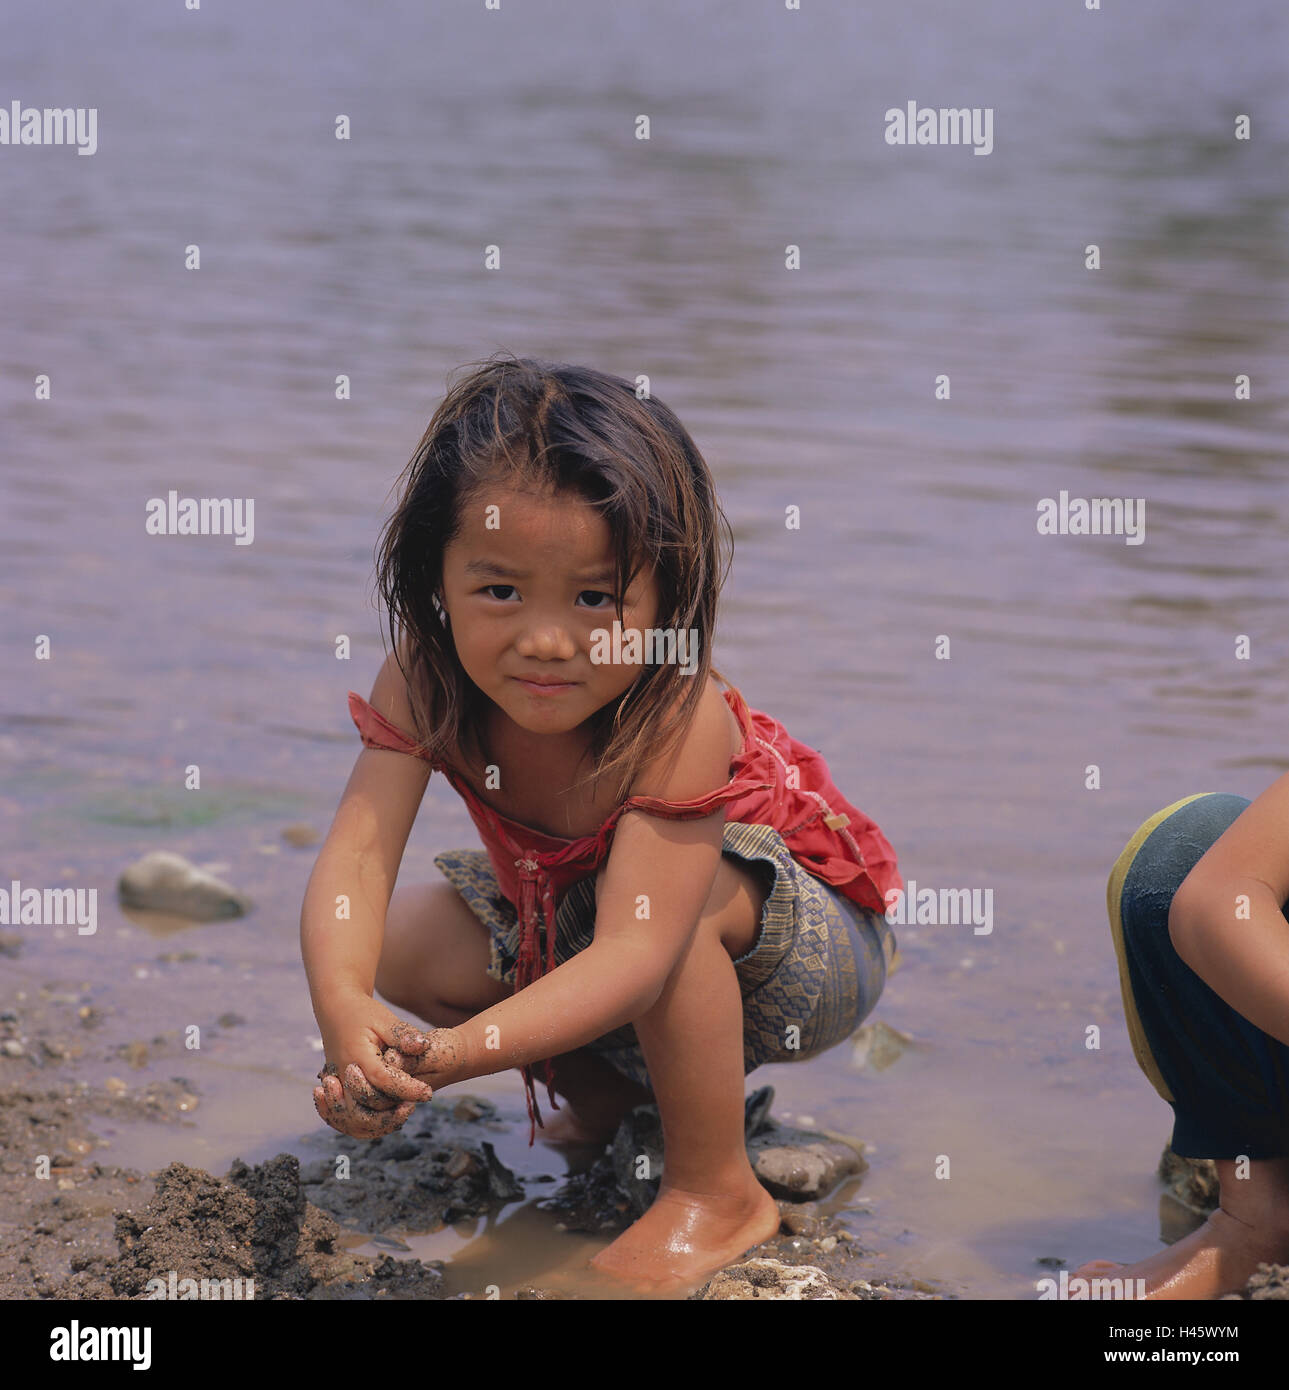 Laos, Vang Vieng, River Nam Song, shore, children, play, girls, squat, no model release, Asia, South-East Asia, destination, locals, people, infant, Asian, dark-haired, swarthy, nicely, water, Stock Photo